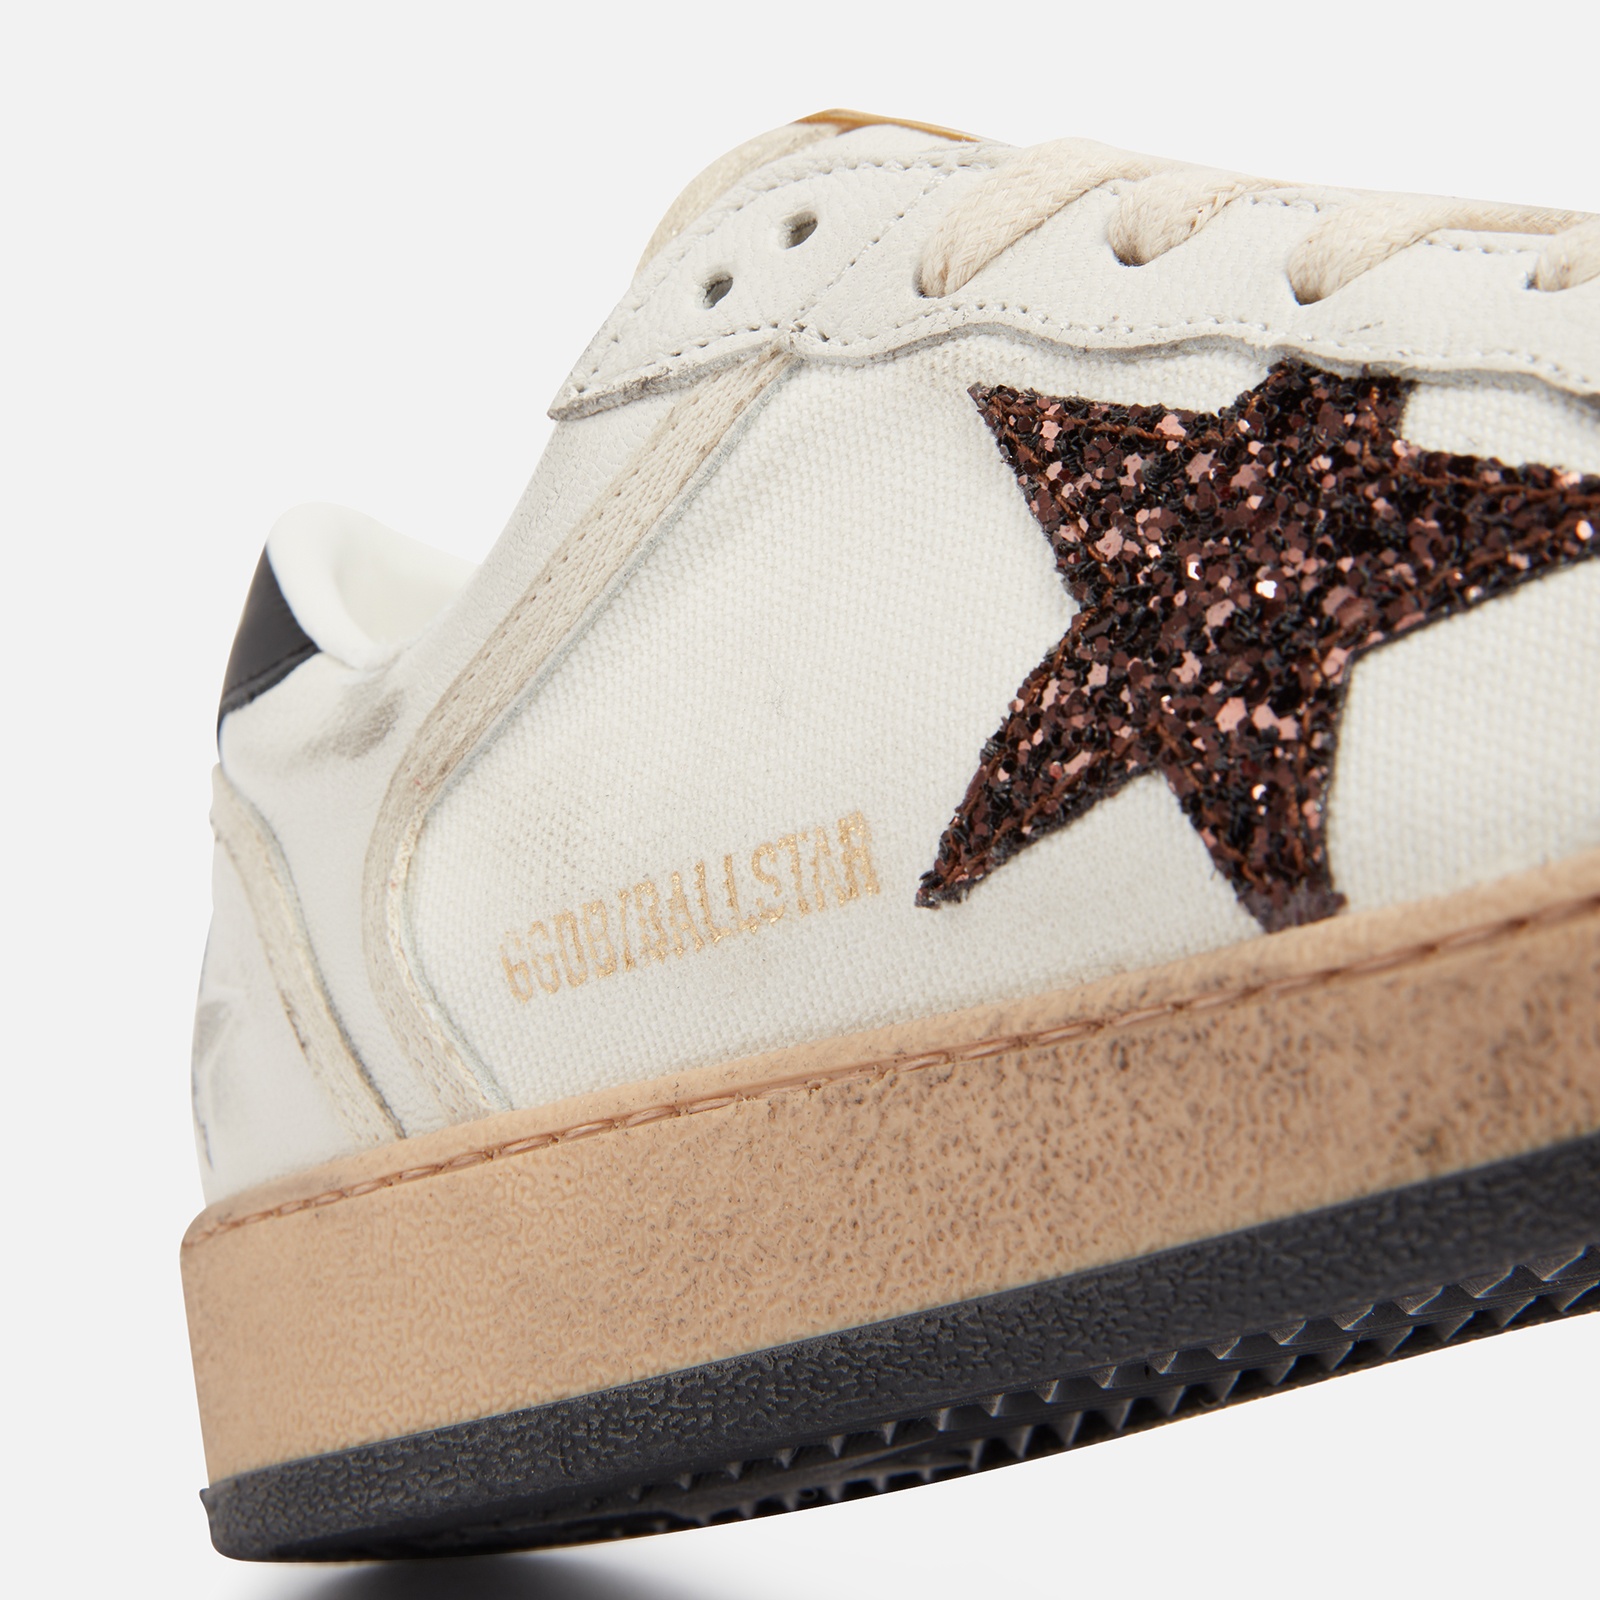 Golden Goose Women's Ball Star Leather and Canvas Trainers - 4